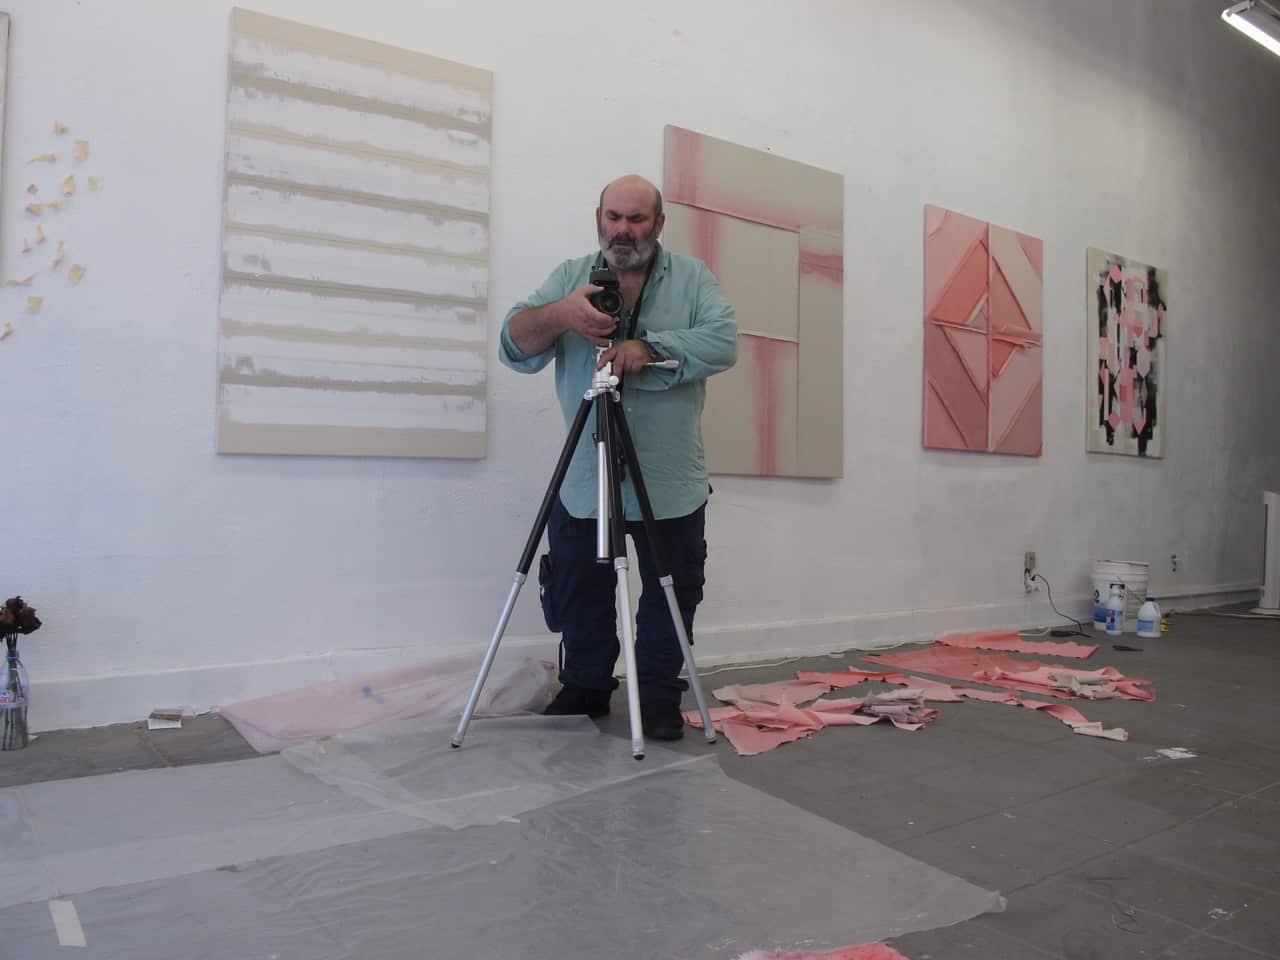 The artist setting a camera on a tripod. Behind him is a studio wall with contemporary artworks hanging.